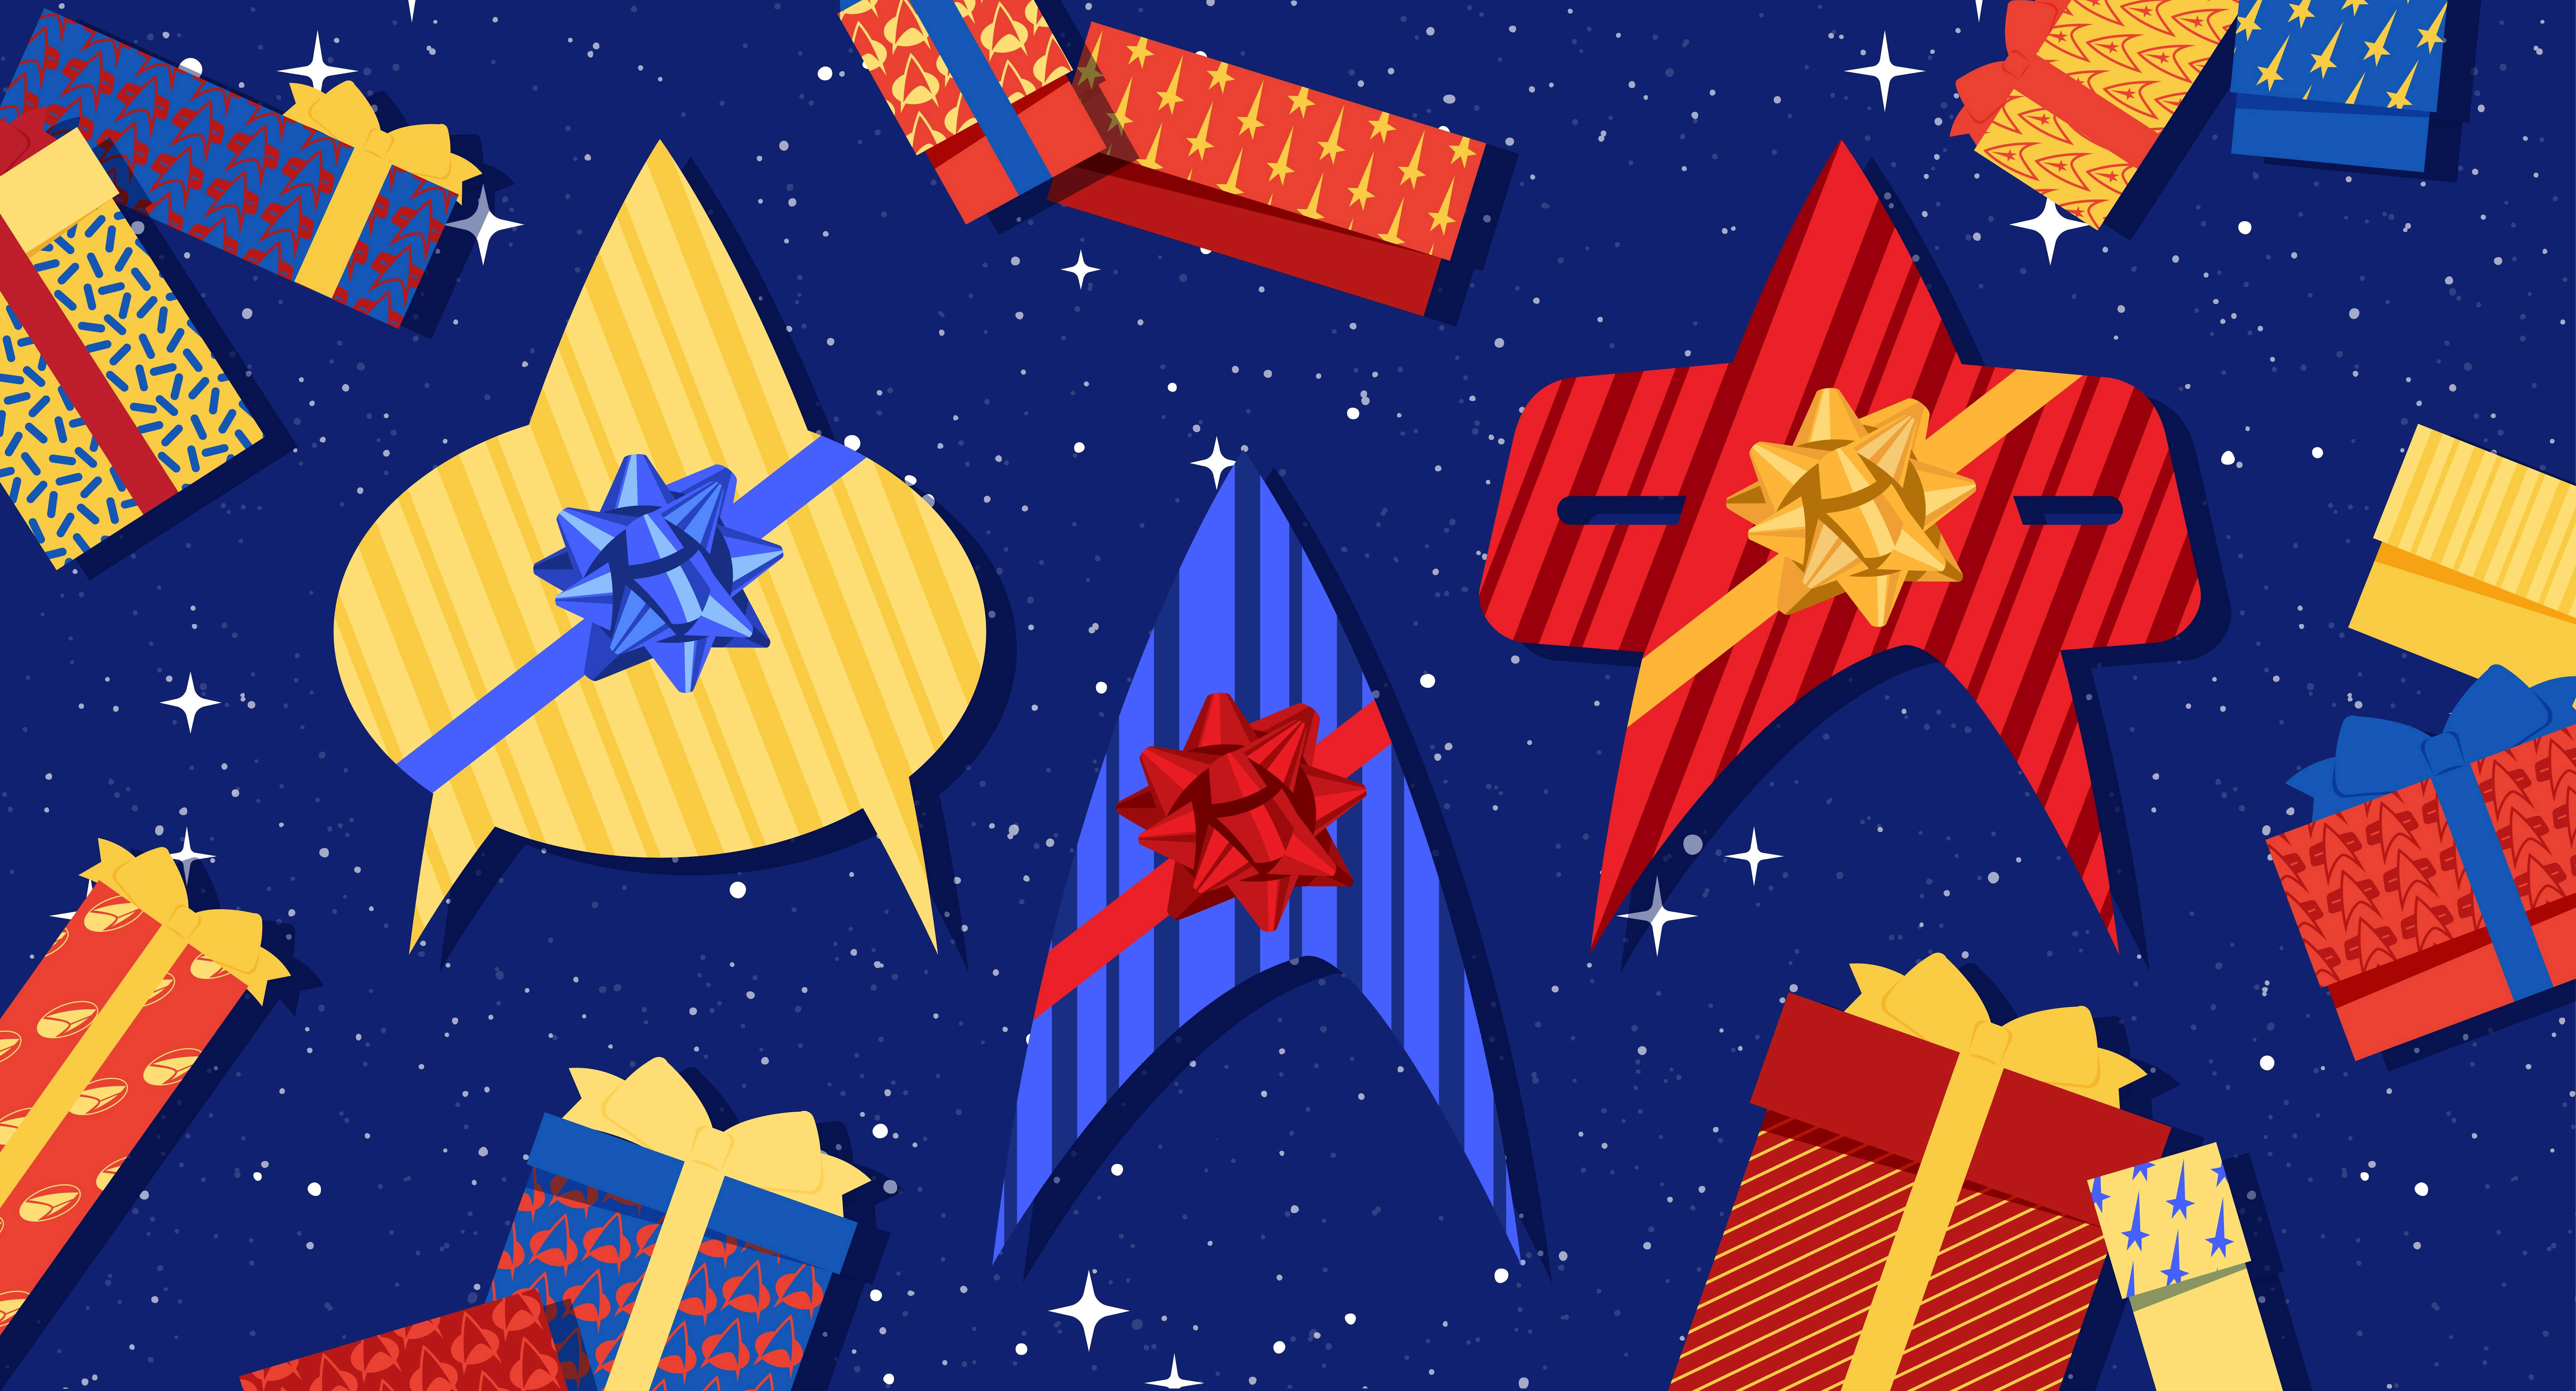 Illustrated banner of holiday-themed Star Trek iconography like the delta shaped like a present